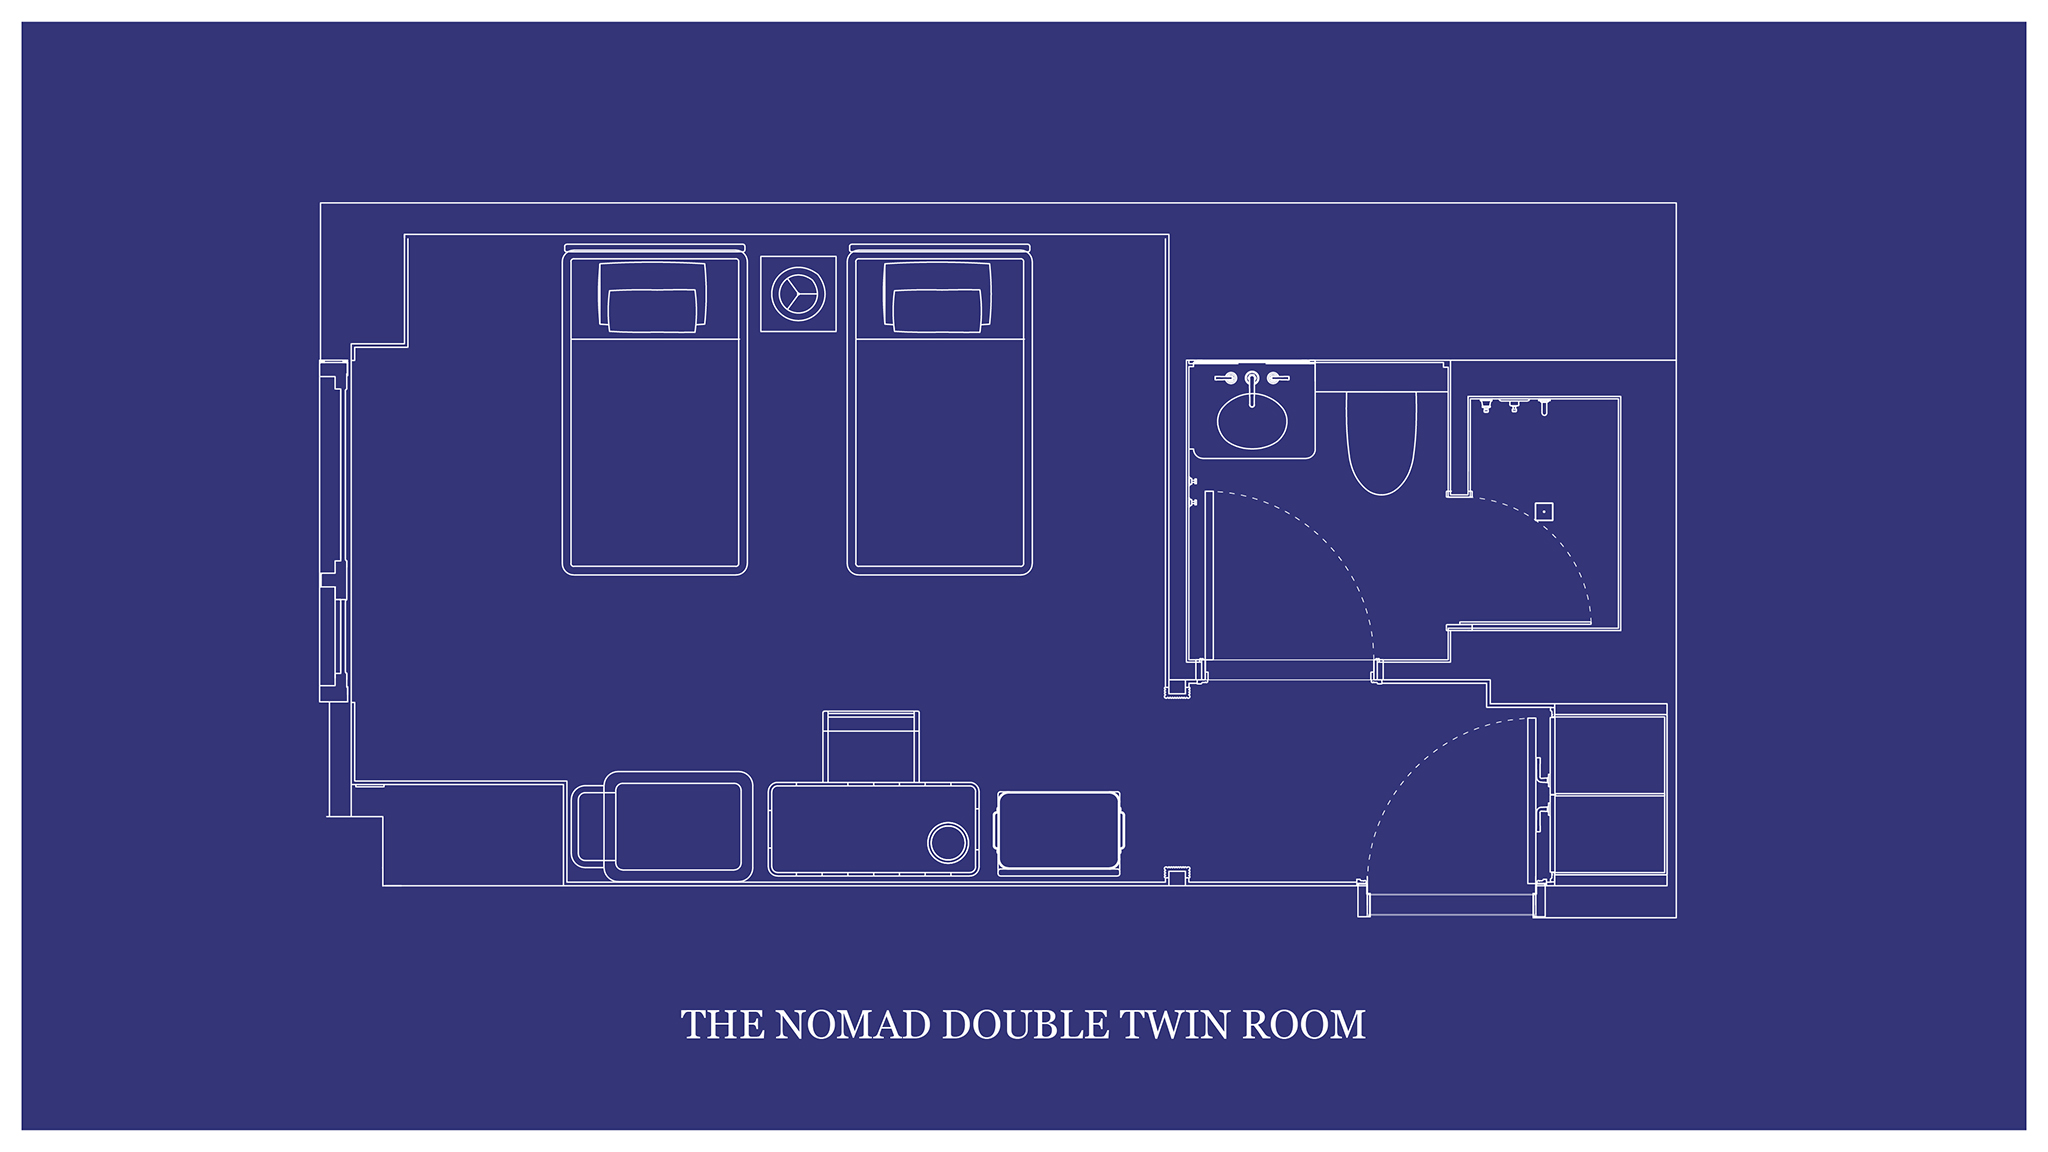 The architectural layout of "THE NOMAD DOUBLE TWIN ROOM" is depicted on a blueprint map.